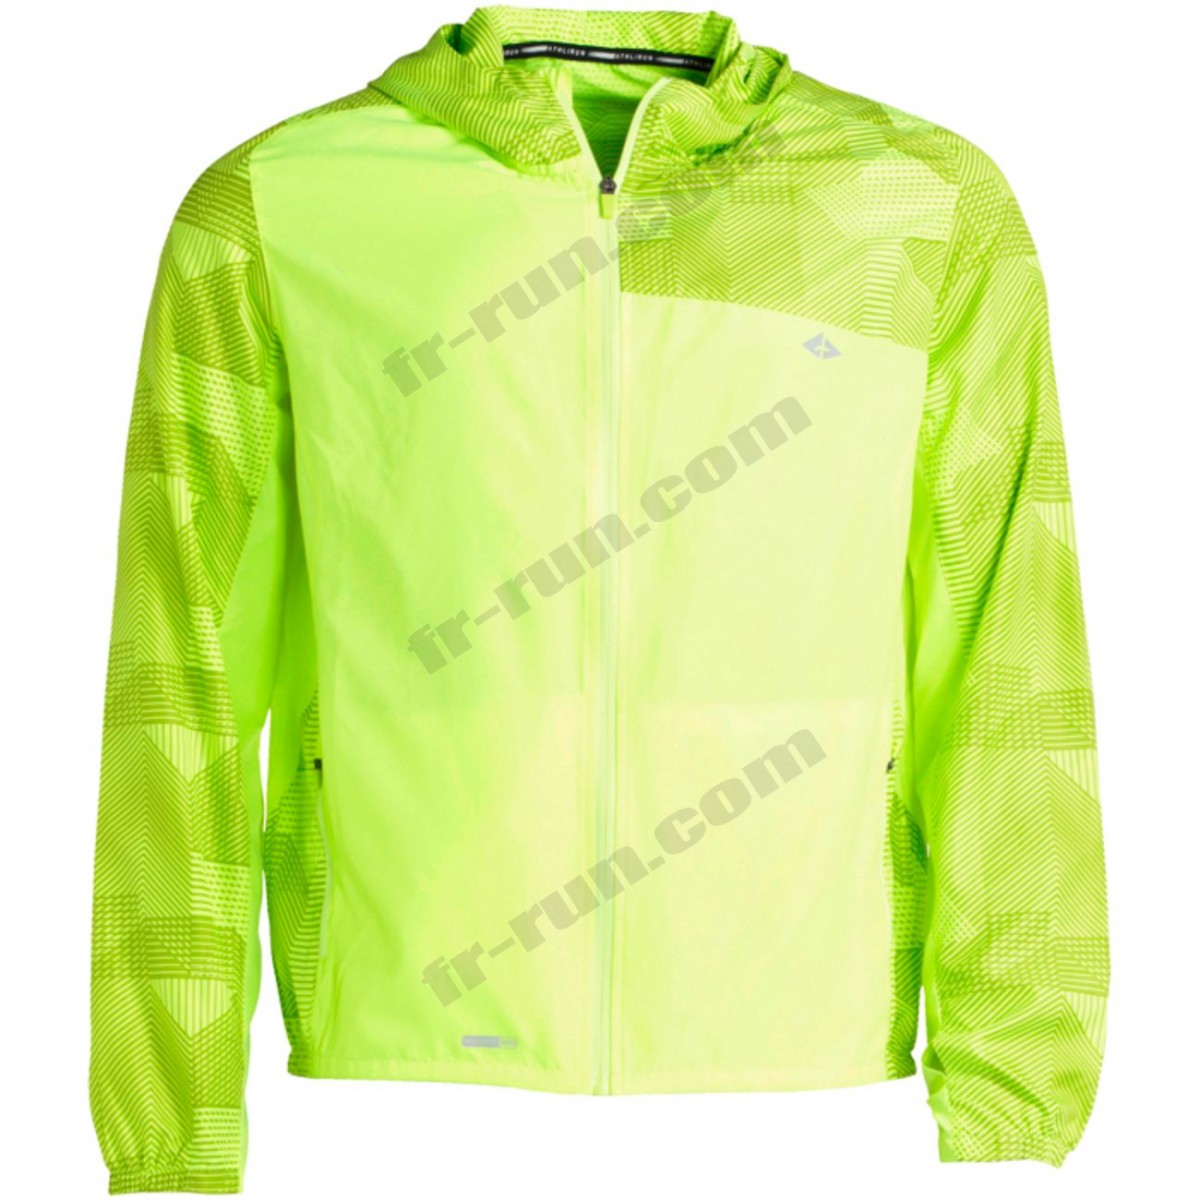 Athlitech/COUPE-VENT running homme ATHLITECH GRANT 200 CPP ◇◇◇ Pas Cher Du Tout - Athlitech/COUPE-VENT running homme ATHLITECH GRANT 200 CPP ◇◇◇ Pas Cher Du Tout